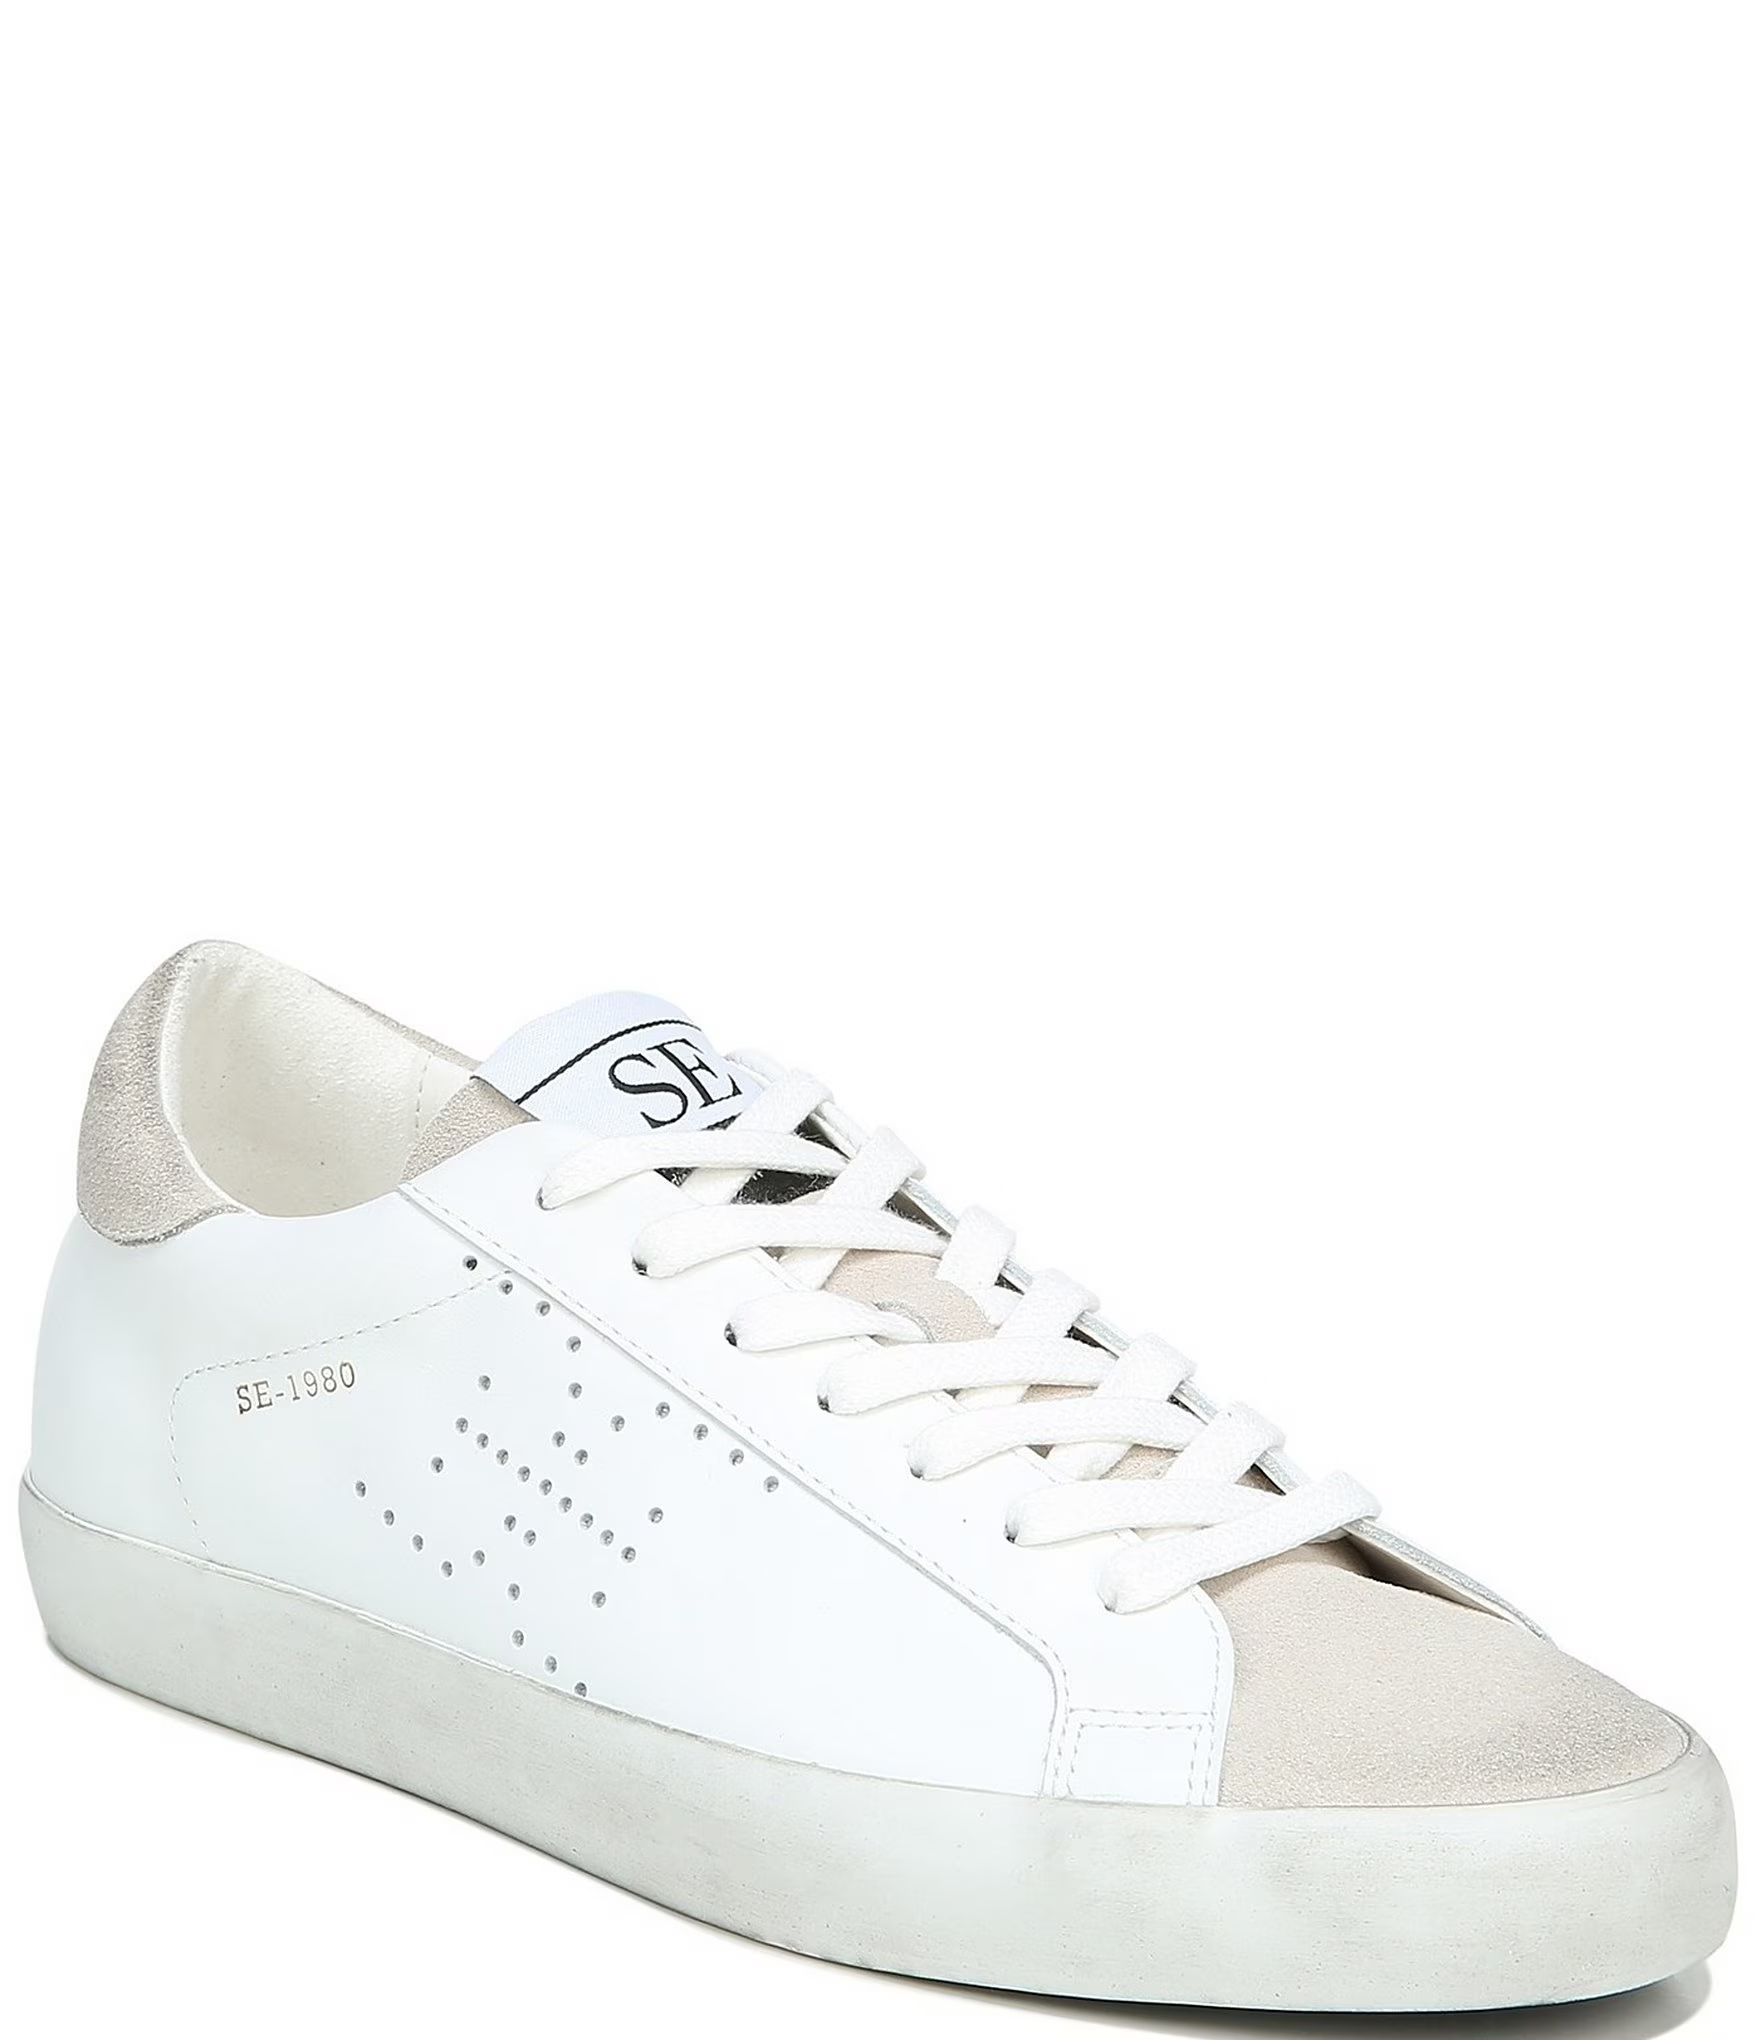 Aubrie Double E Perforated Sneakers | Dillards